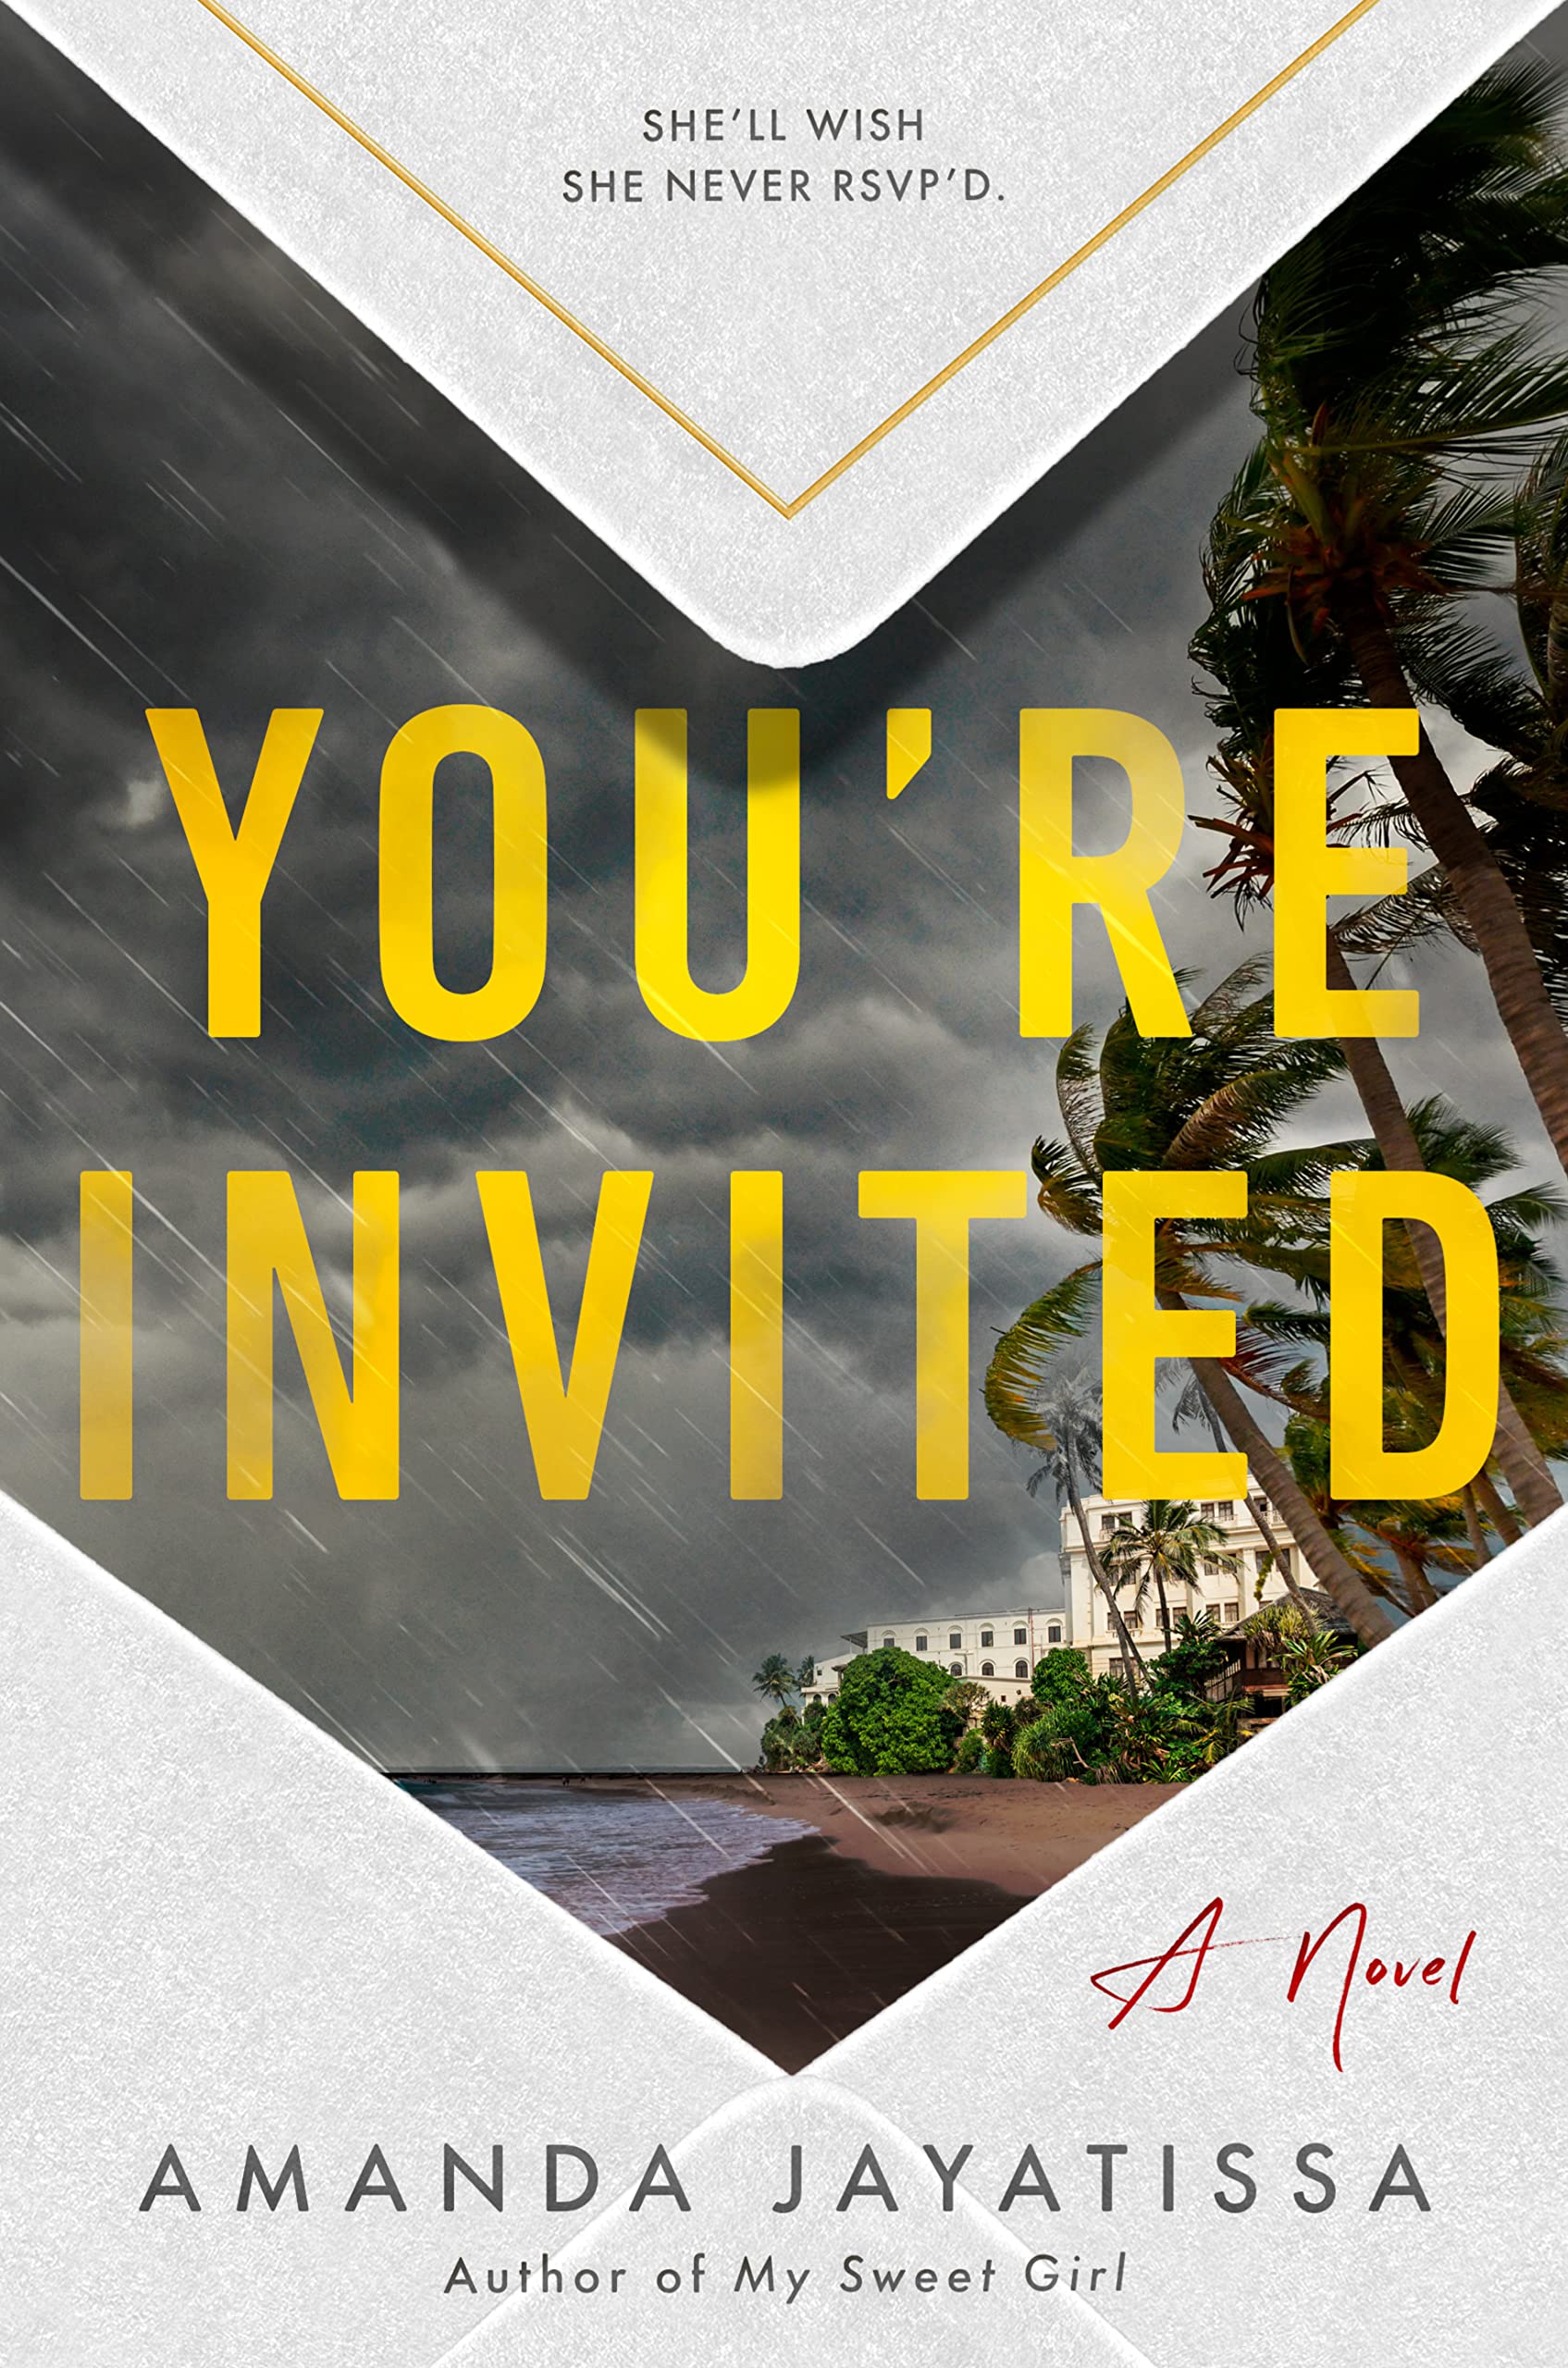 Youre Invited By Amanda Jayatissa Bookreview Blogtour Always With